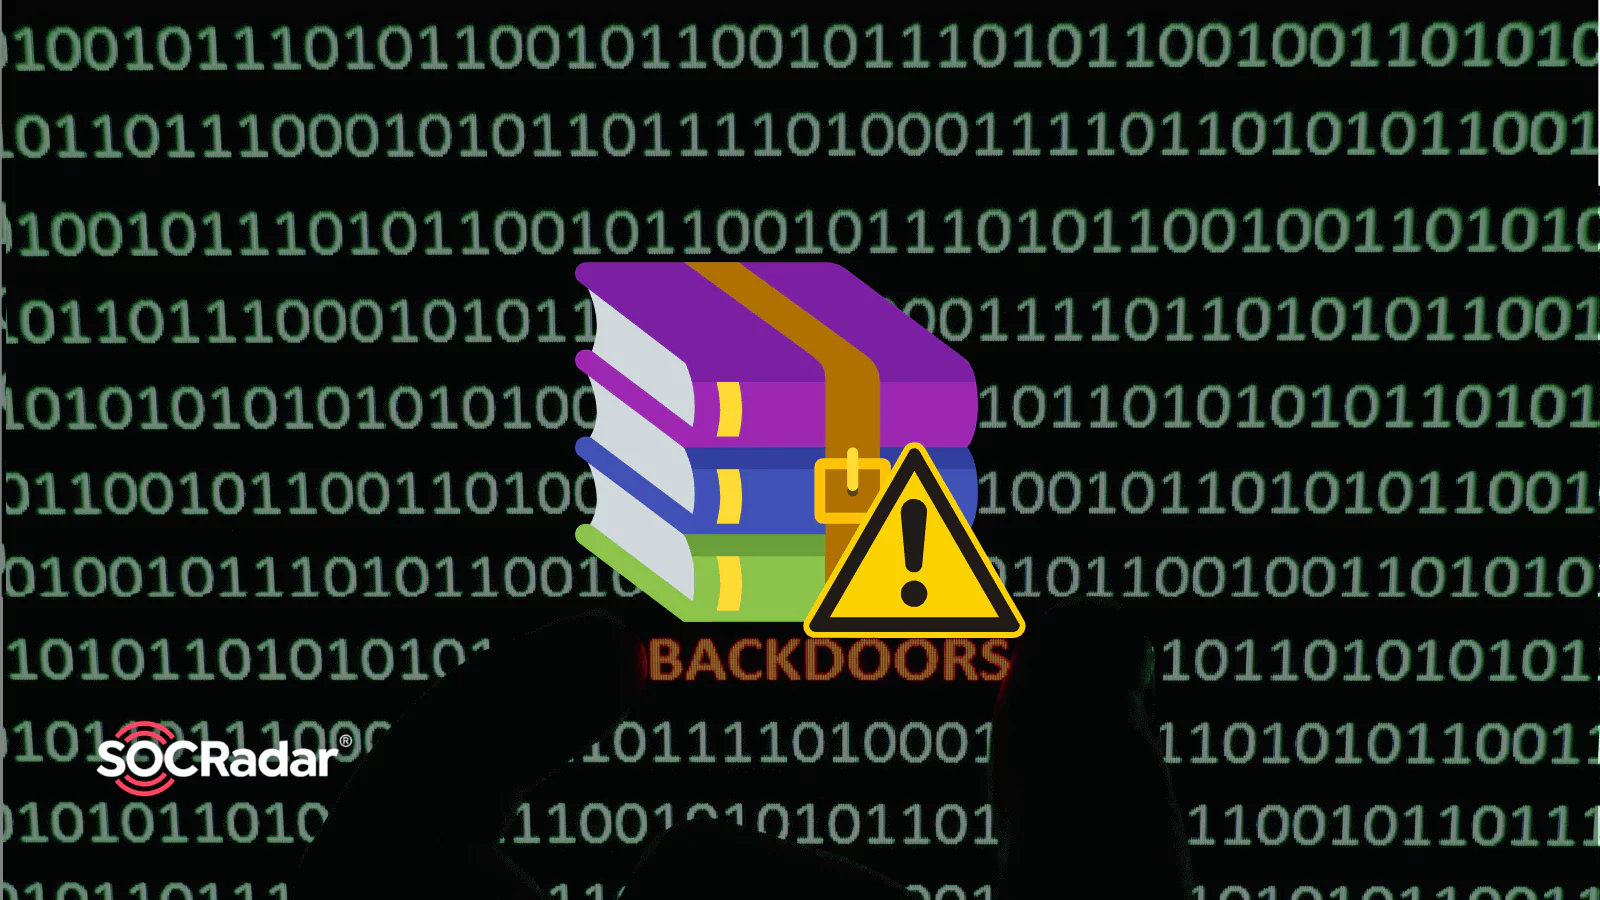 SOCRadar® Cyber Intelligence Inc. | Hackers Exploit WinRAR SFX Archives to Install Backdoors Undetected